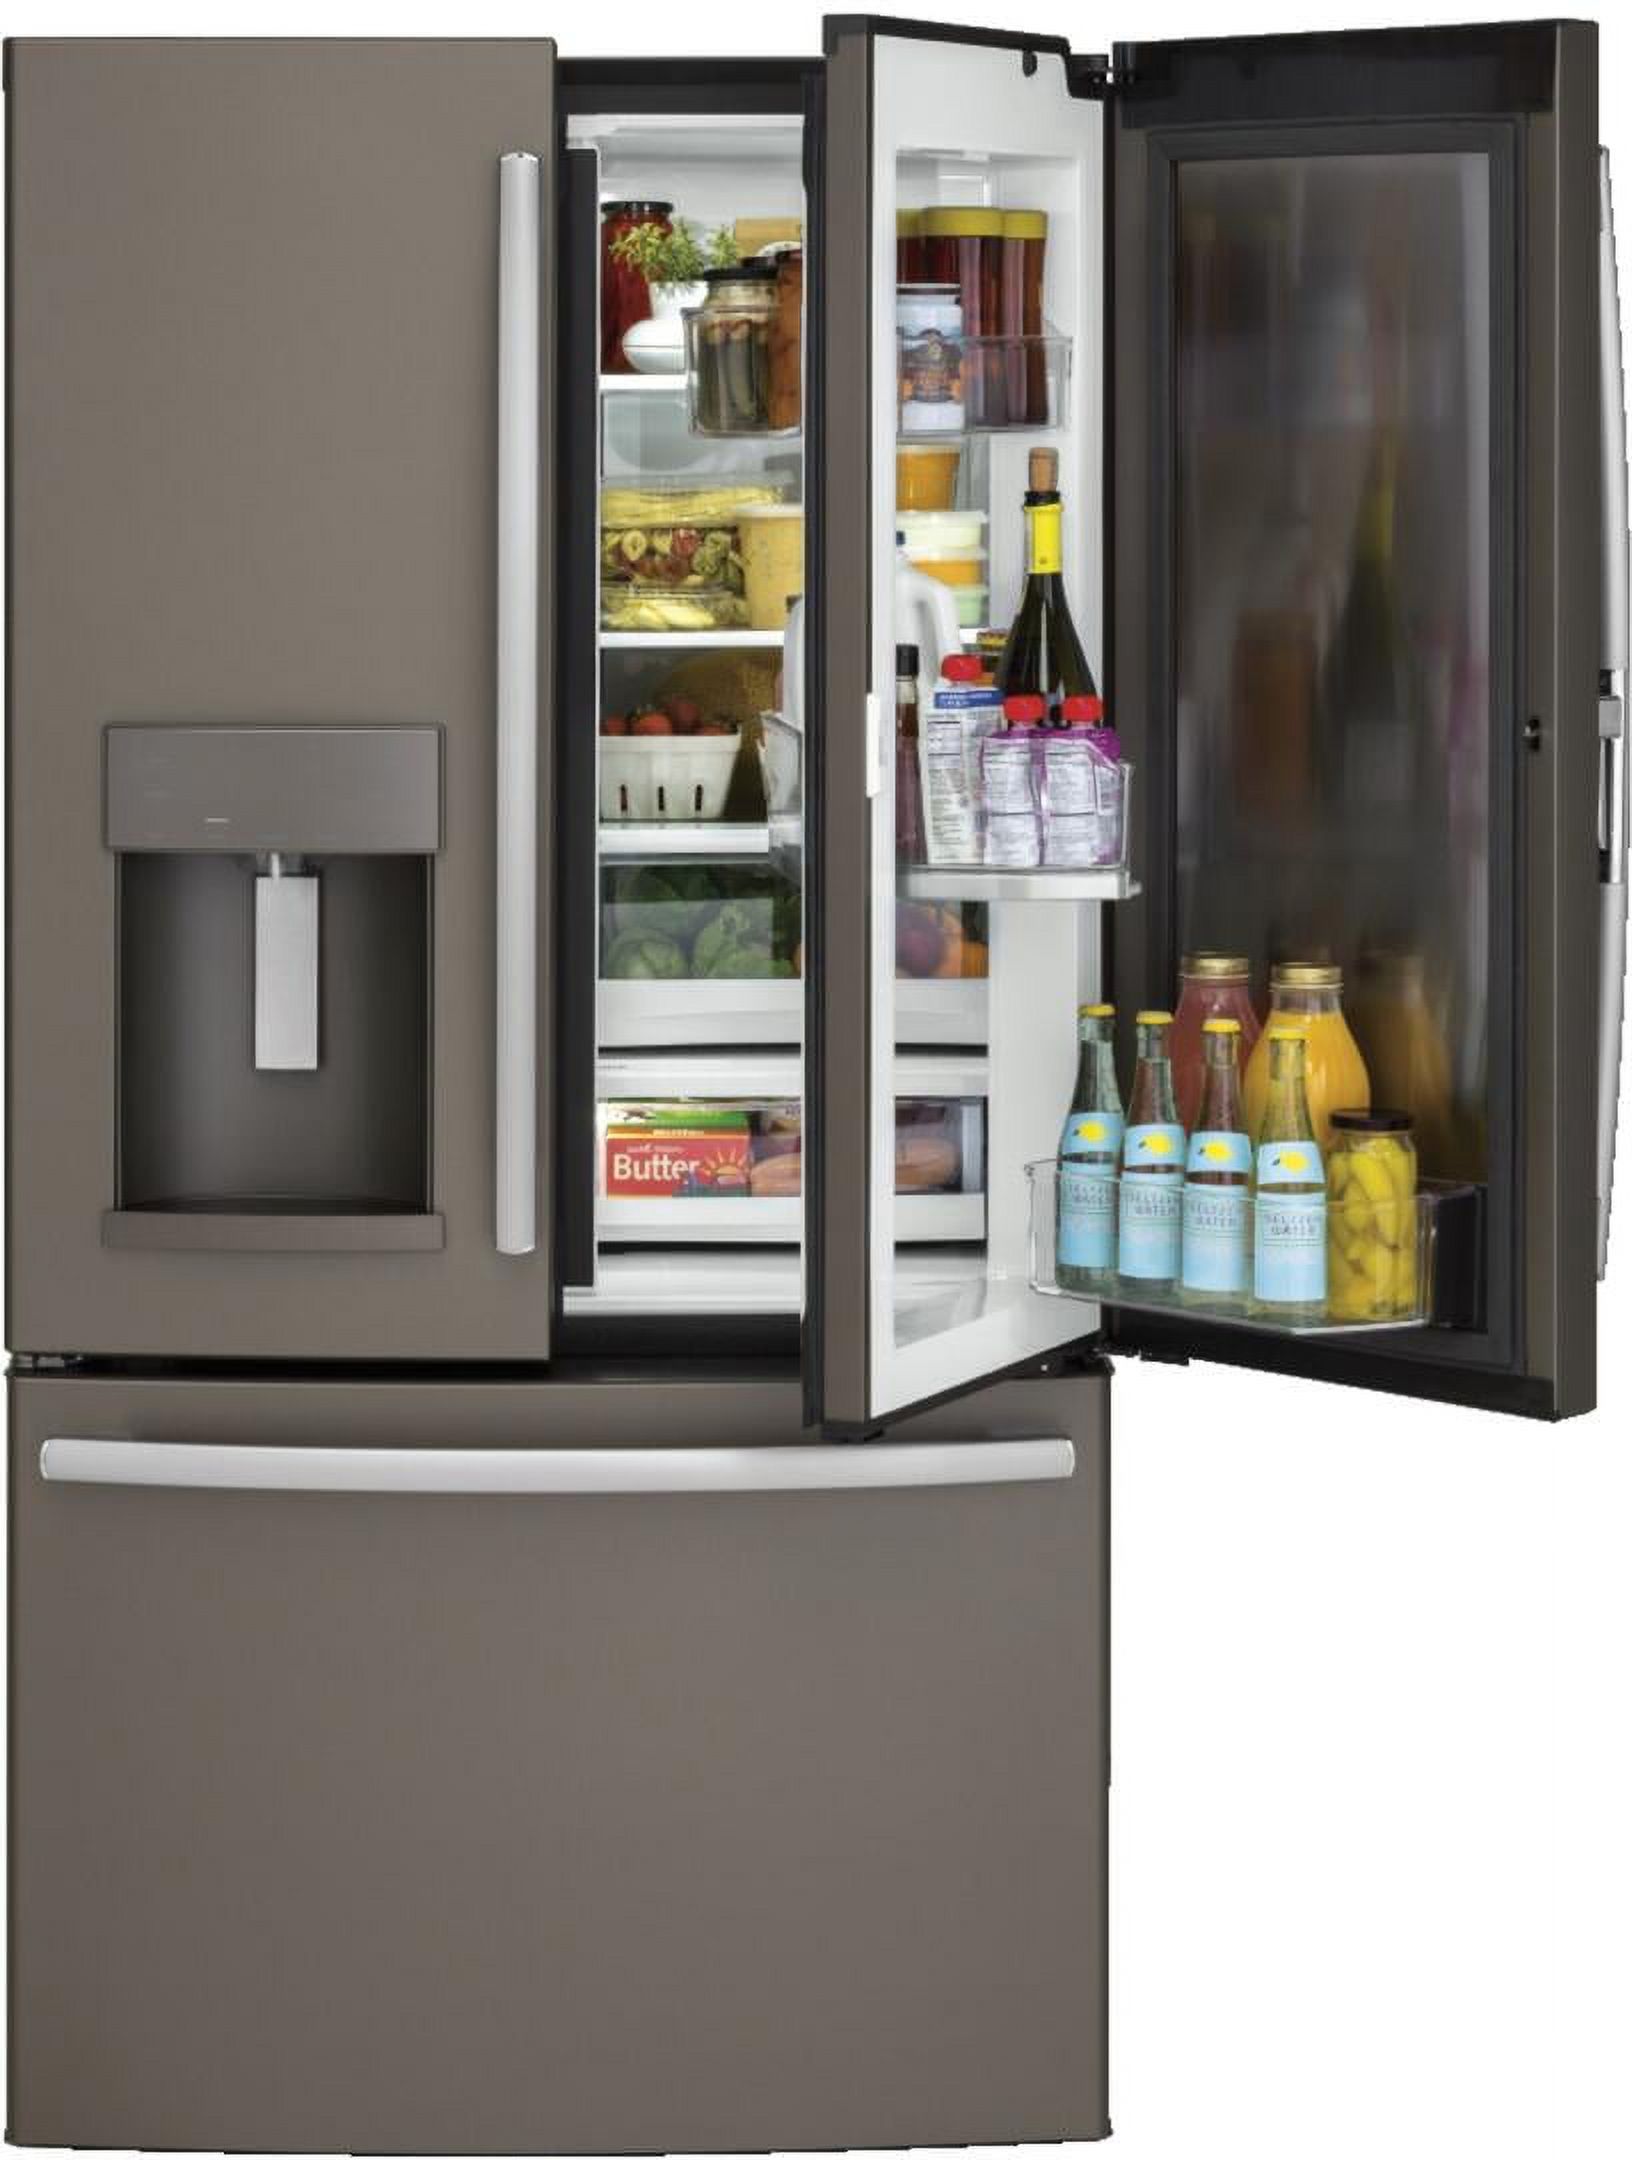 "GE GFD28GMLES 36 Inch French Door Refrigerator with 27.8 cu. ft. Total Capacity, 5 Glass Shelves, 9.2 cu. ft. Freezer Capacity, in Slate" - image 2 of 11